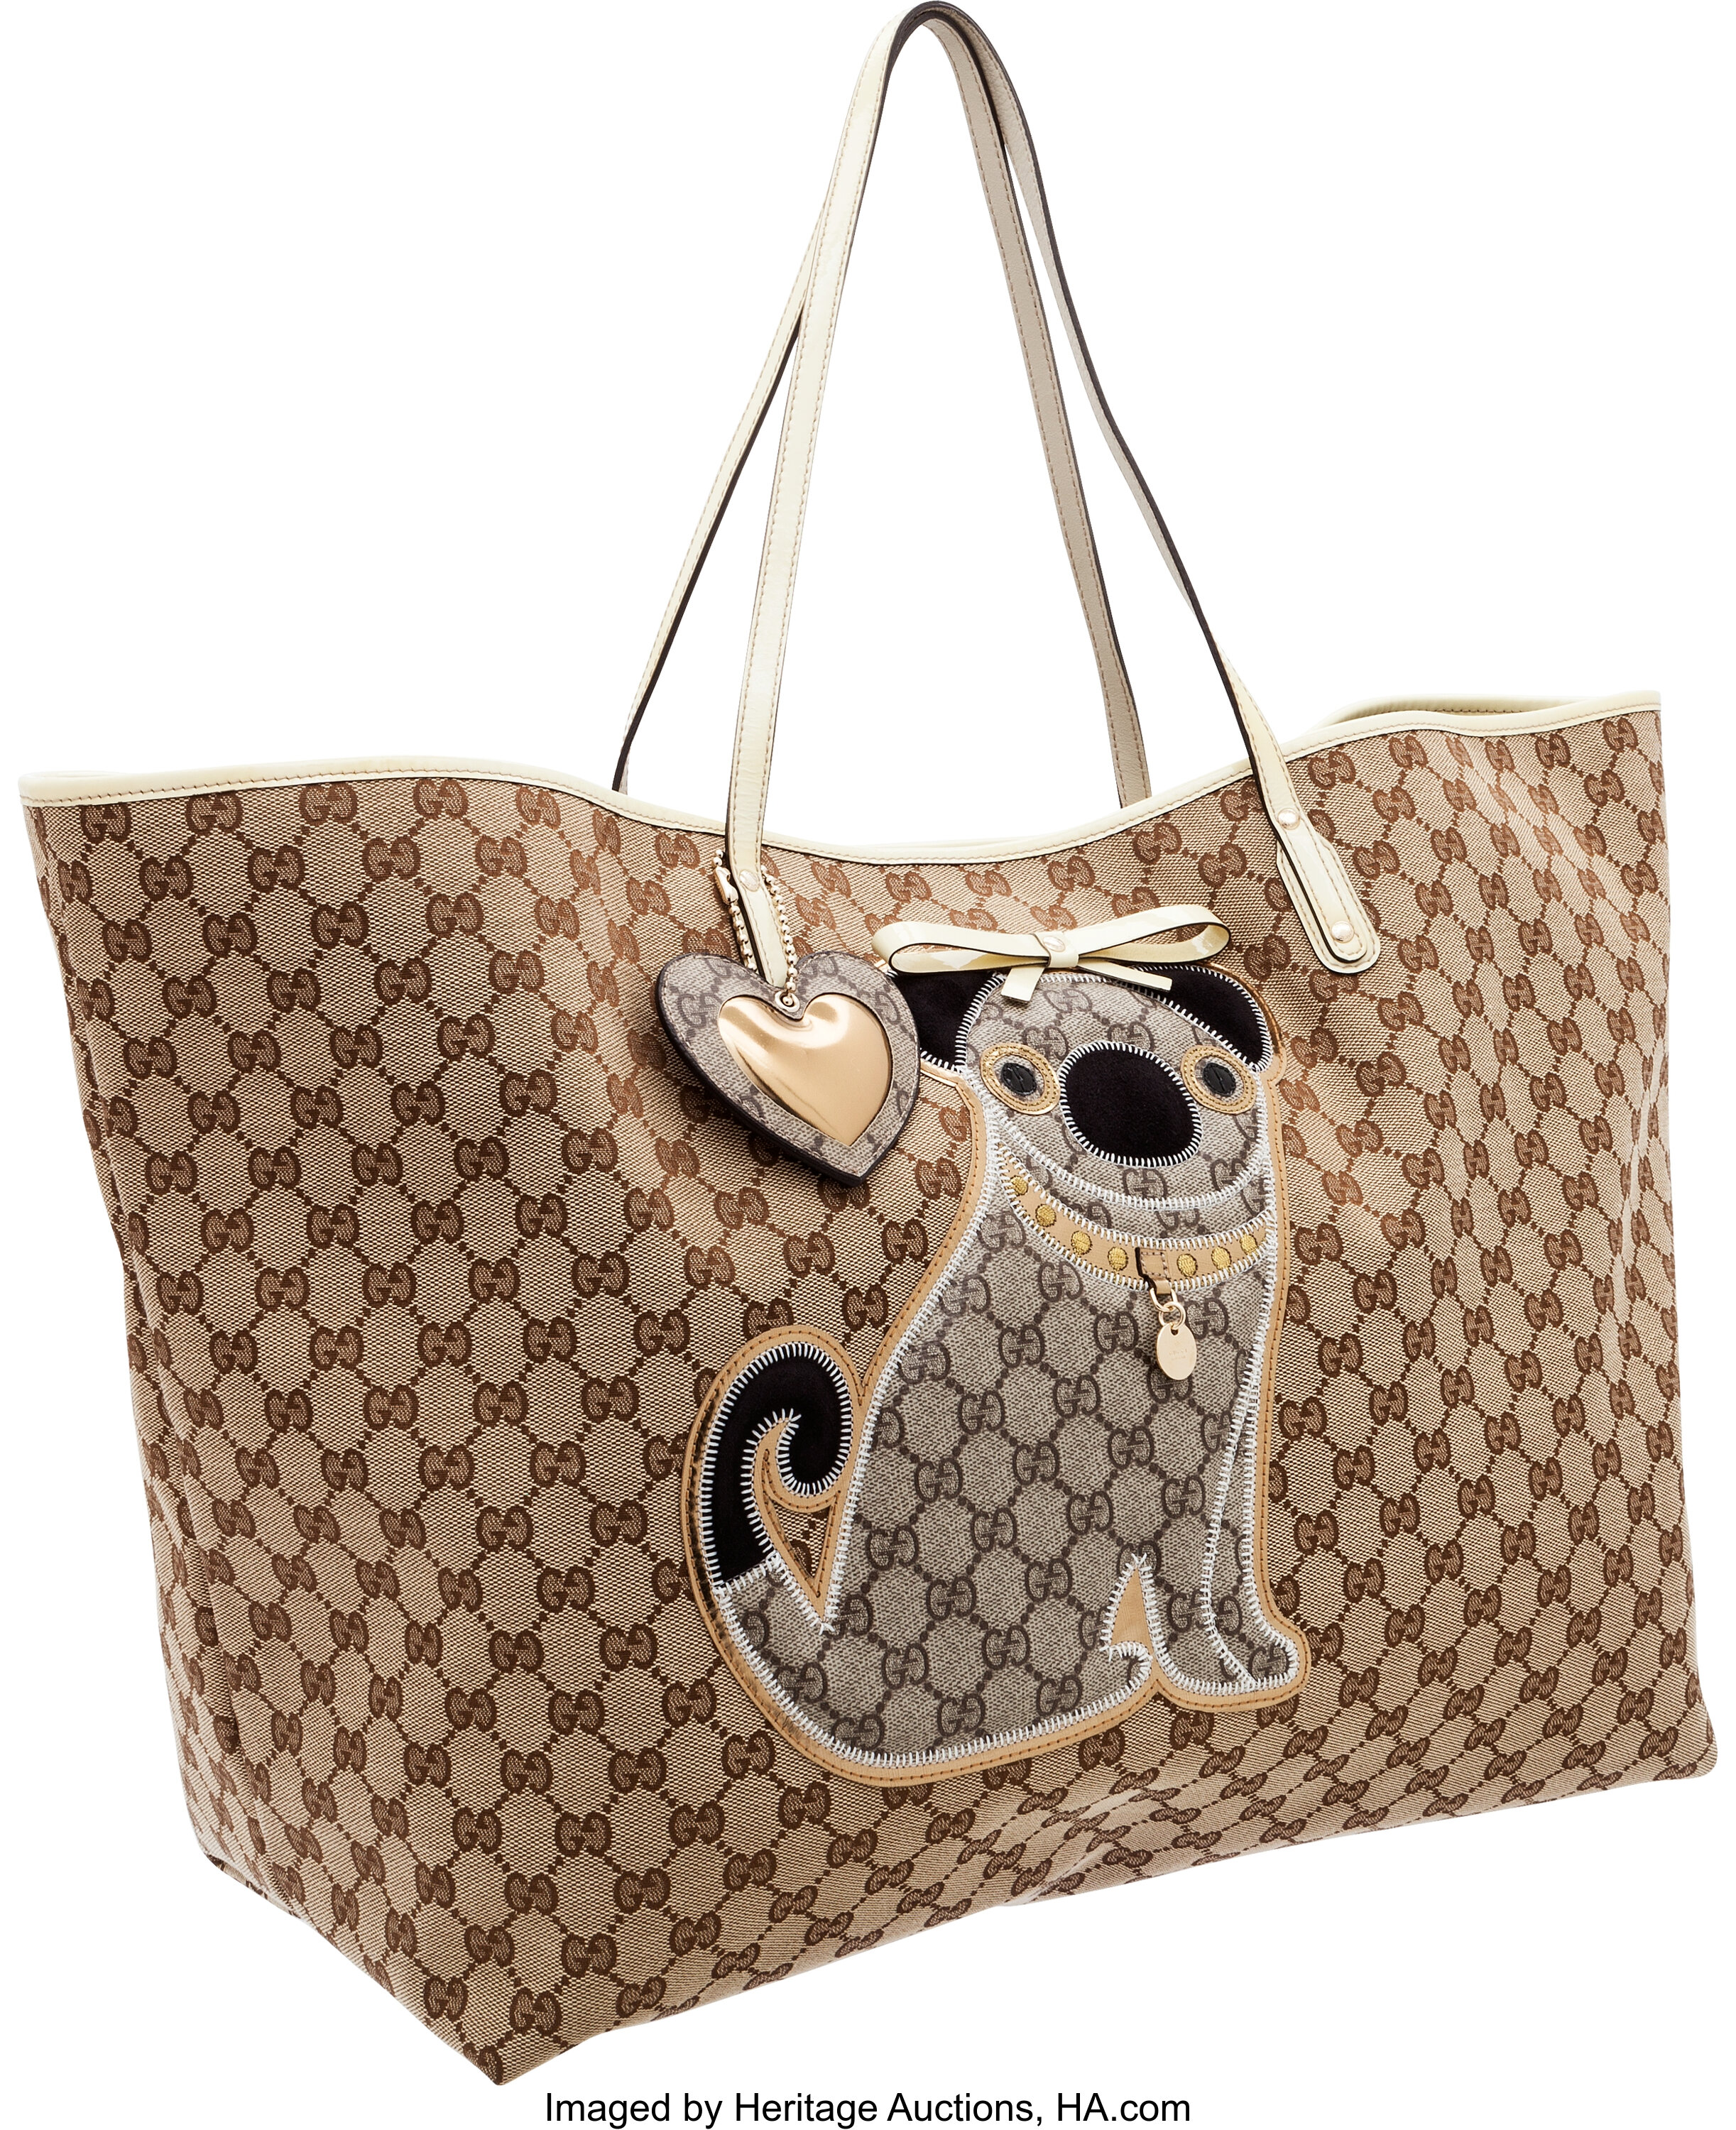 Gucci Limited Edition Classic Monogram Canvas Oversize Tote Bag